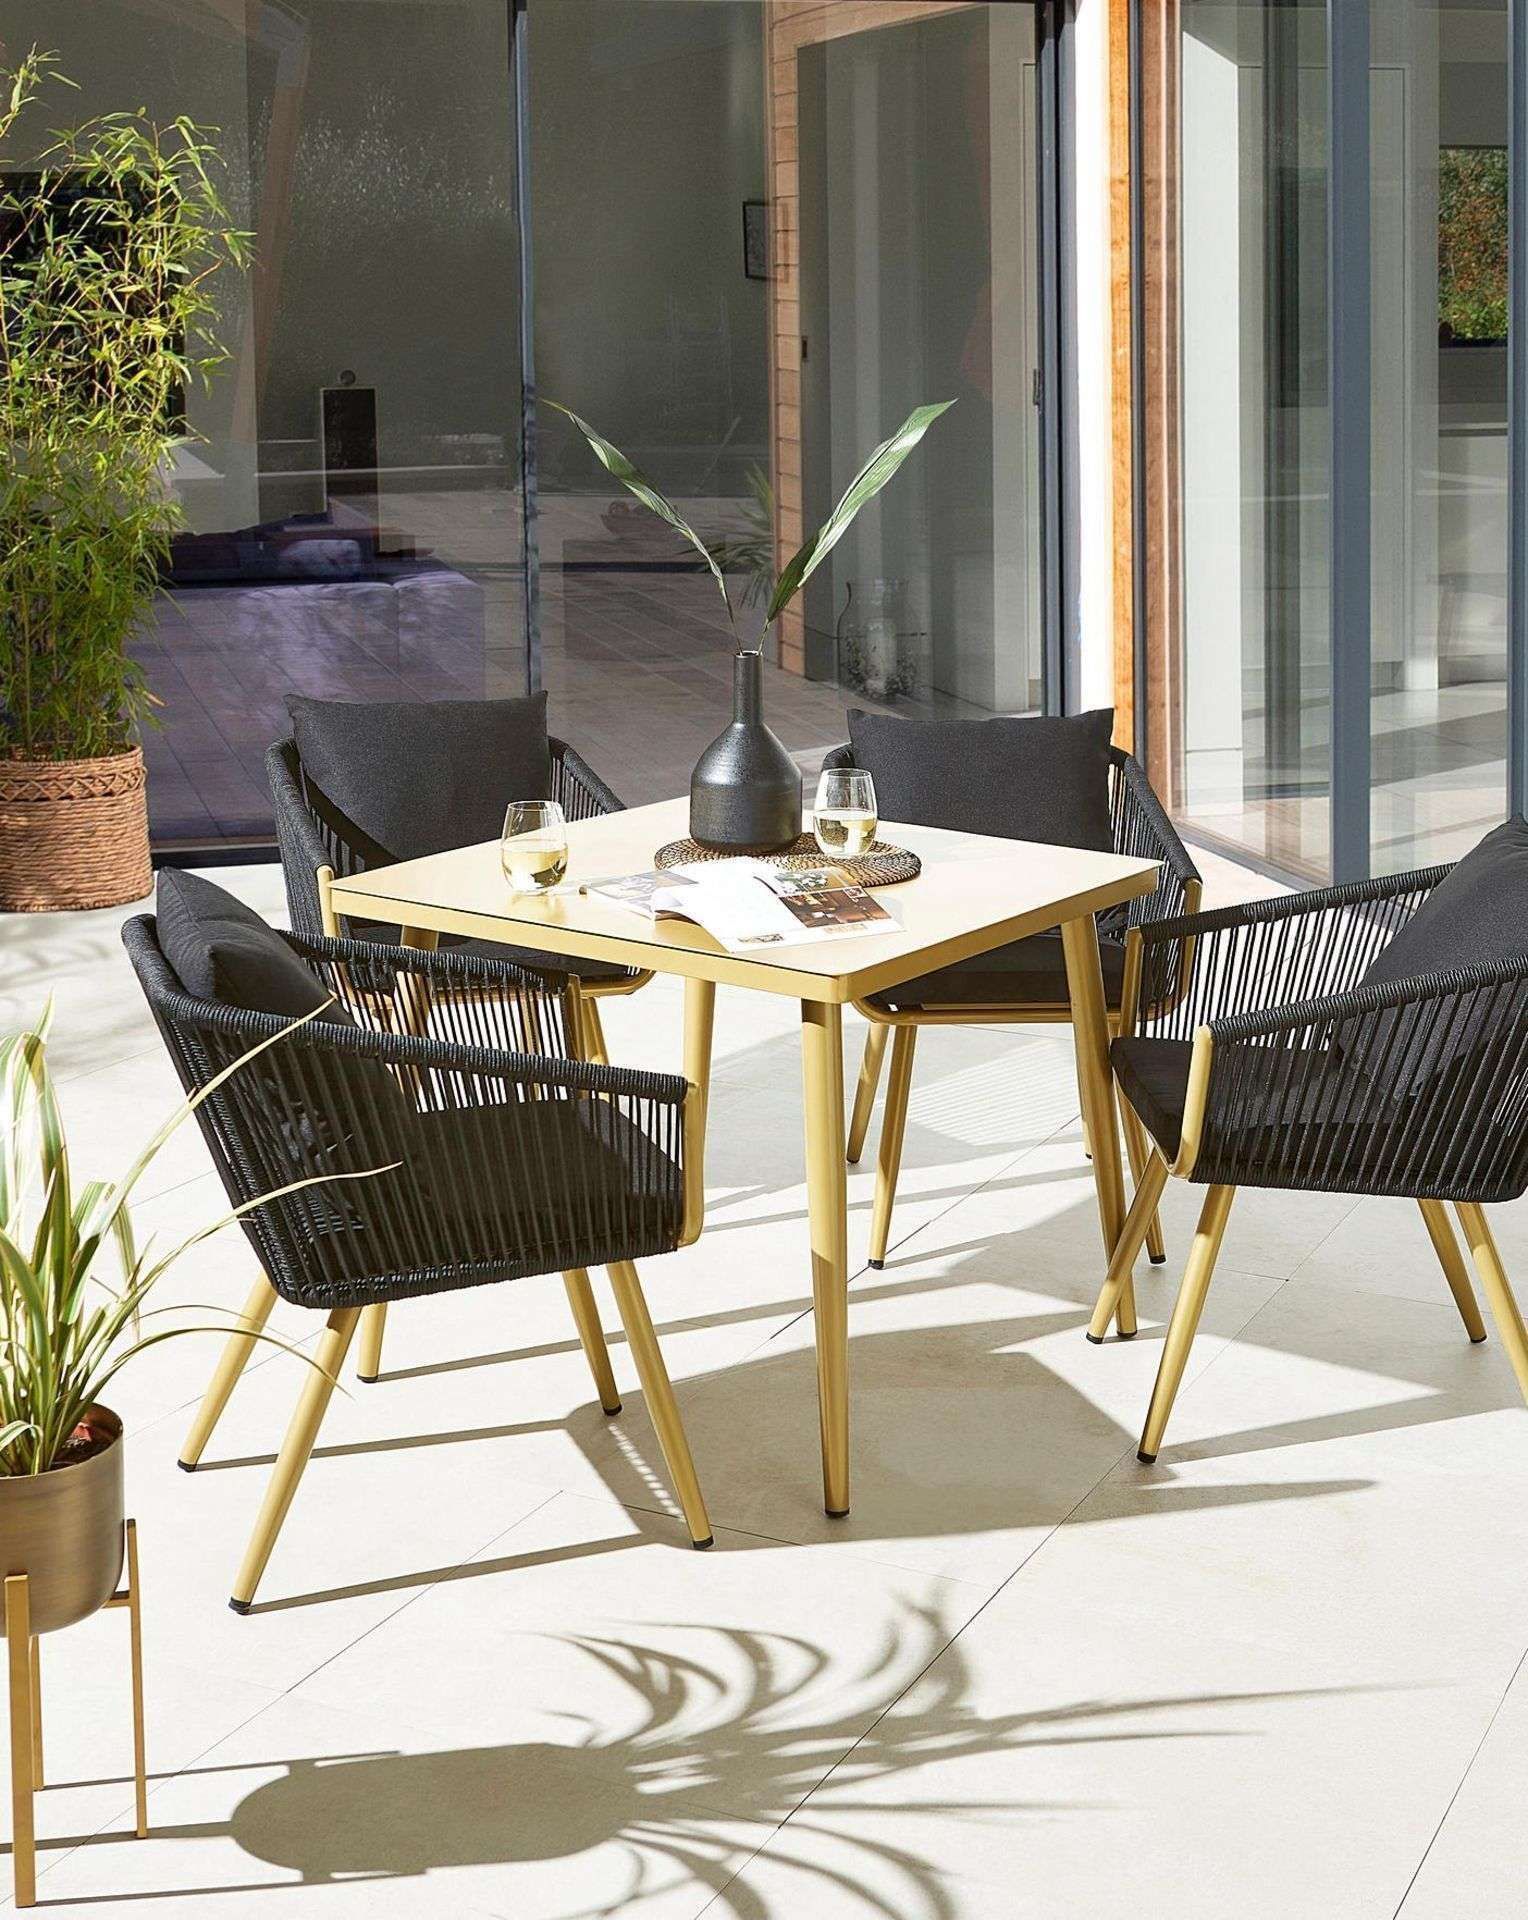 New & Packaged Joanna Hope Naya 4 Seater Dining Set. RRP £719. (P/W)This Exclusive Joanna Hope